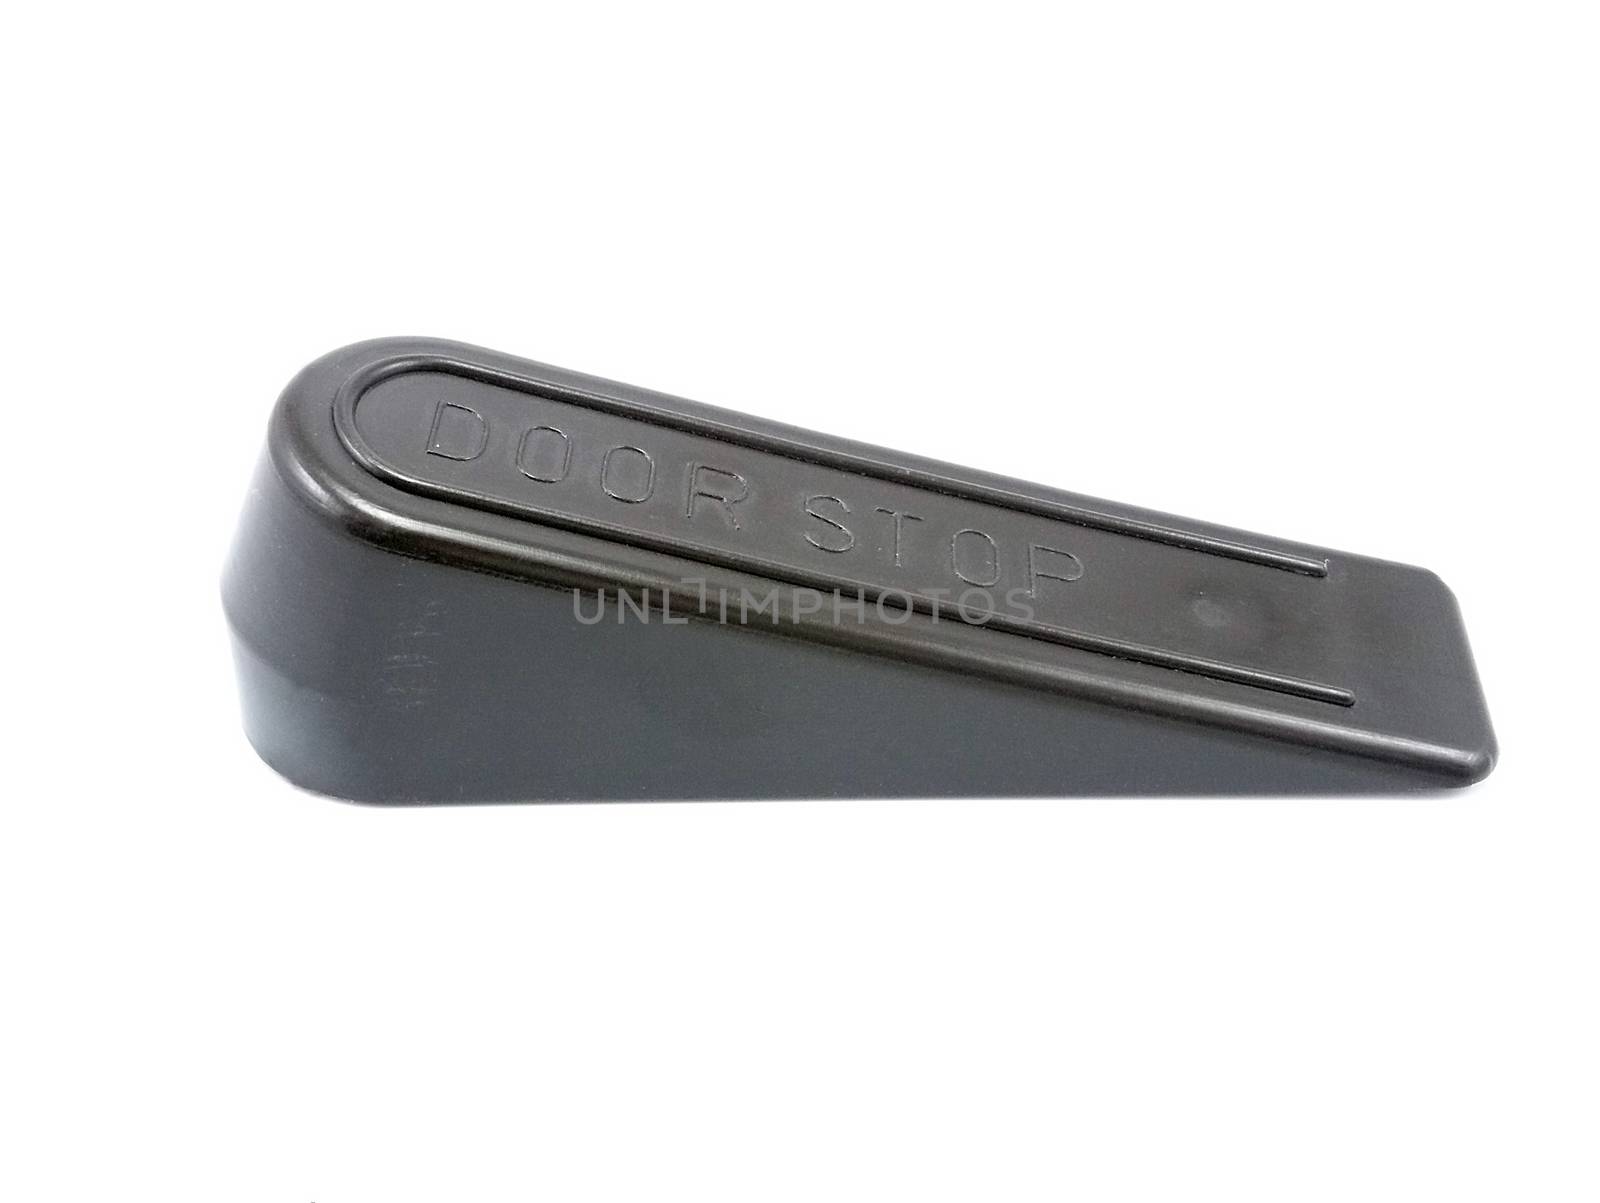 Black hard inclined plastic door stopper with ridges use to put underneath the door